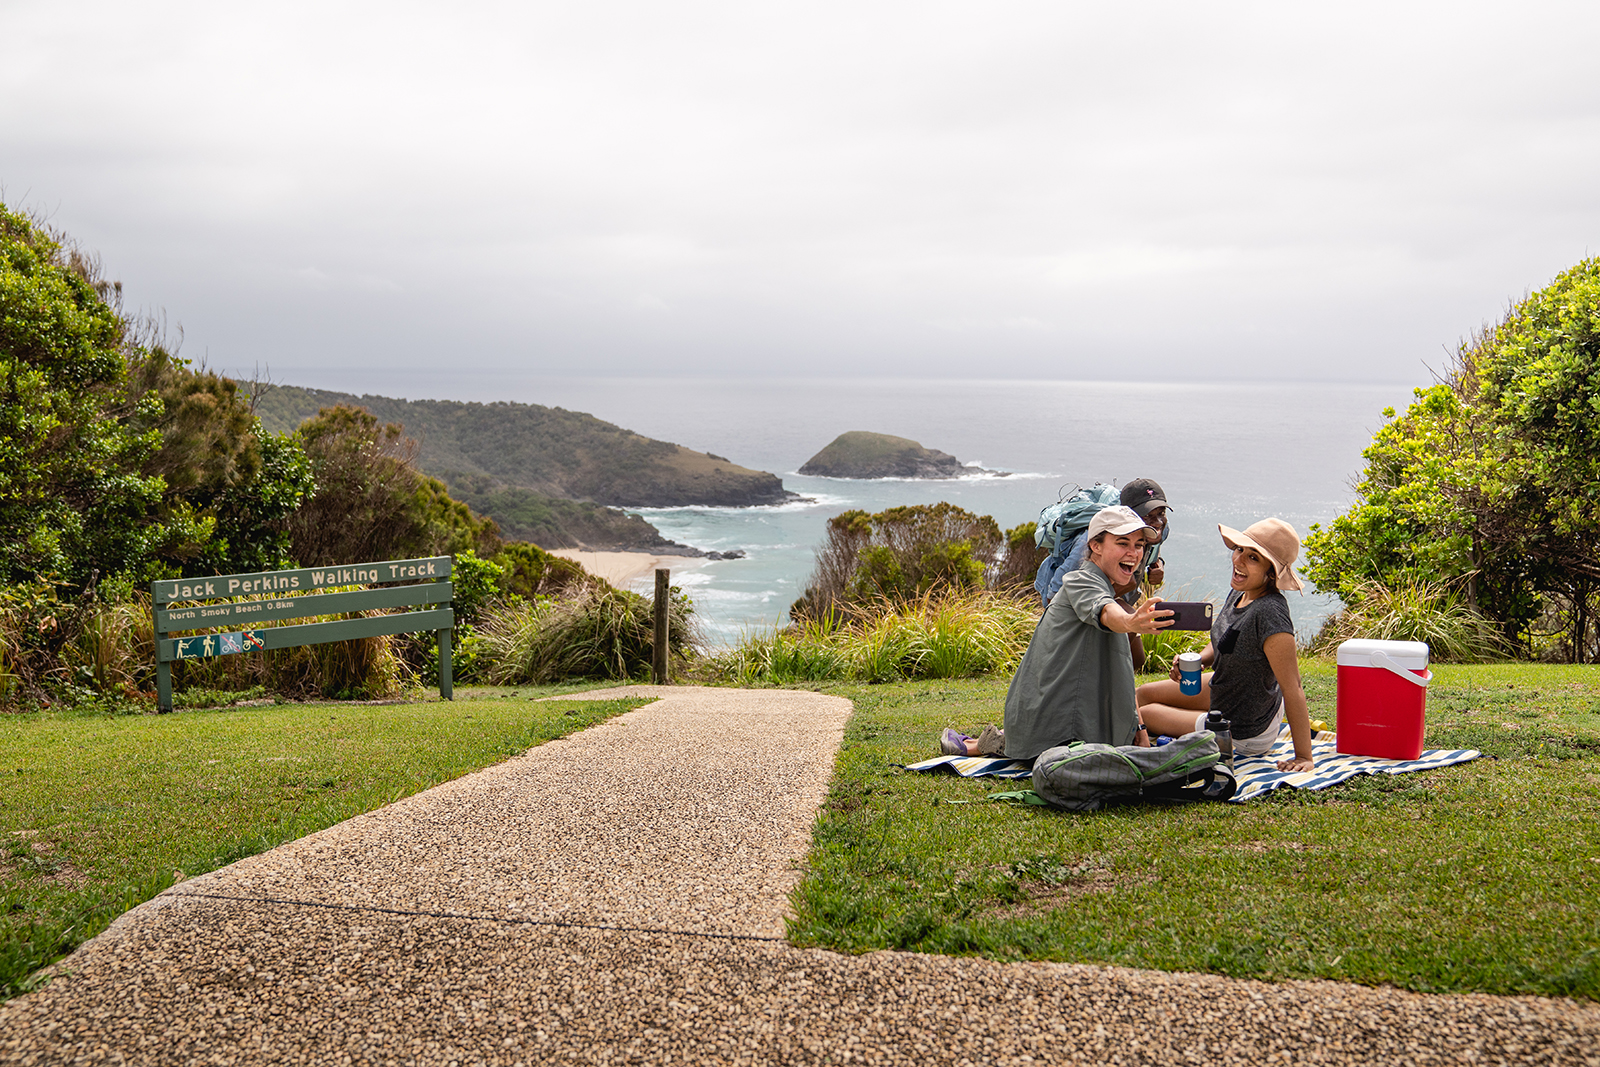 Group of people having a picnic near Jack Perkins walking track, Hat Head National Park. Photo credit: Rob Mulally/DPIE